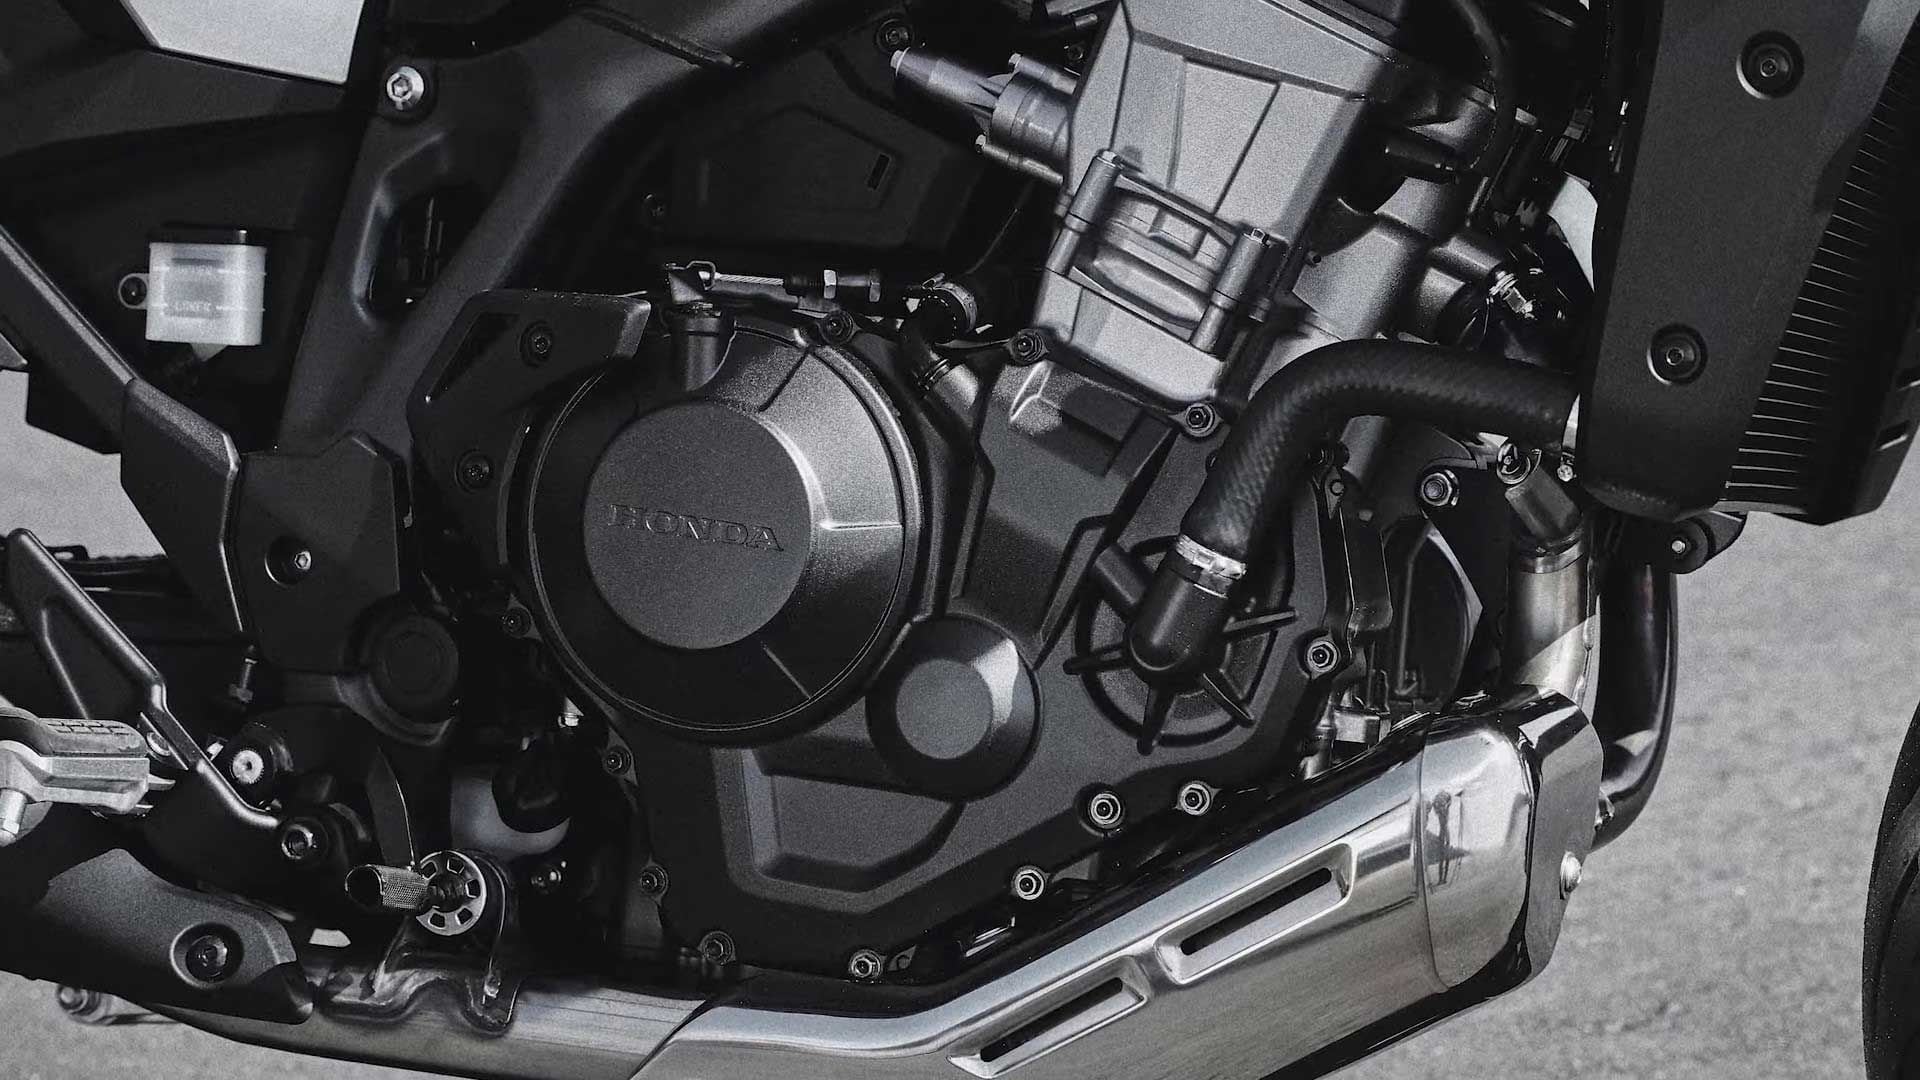 The SOHC engine is likely to have the same power figures of 100 hp and 77 pound-feet of torque. On the Hawk, however, you’ll only be able to have it with a conventional six-speed transmission.